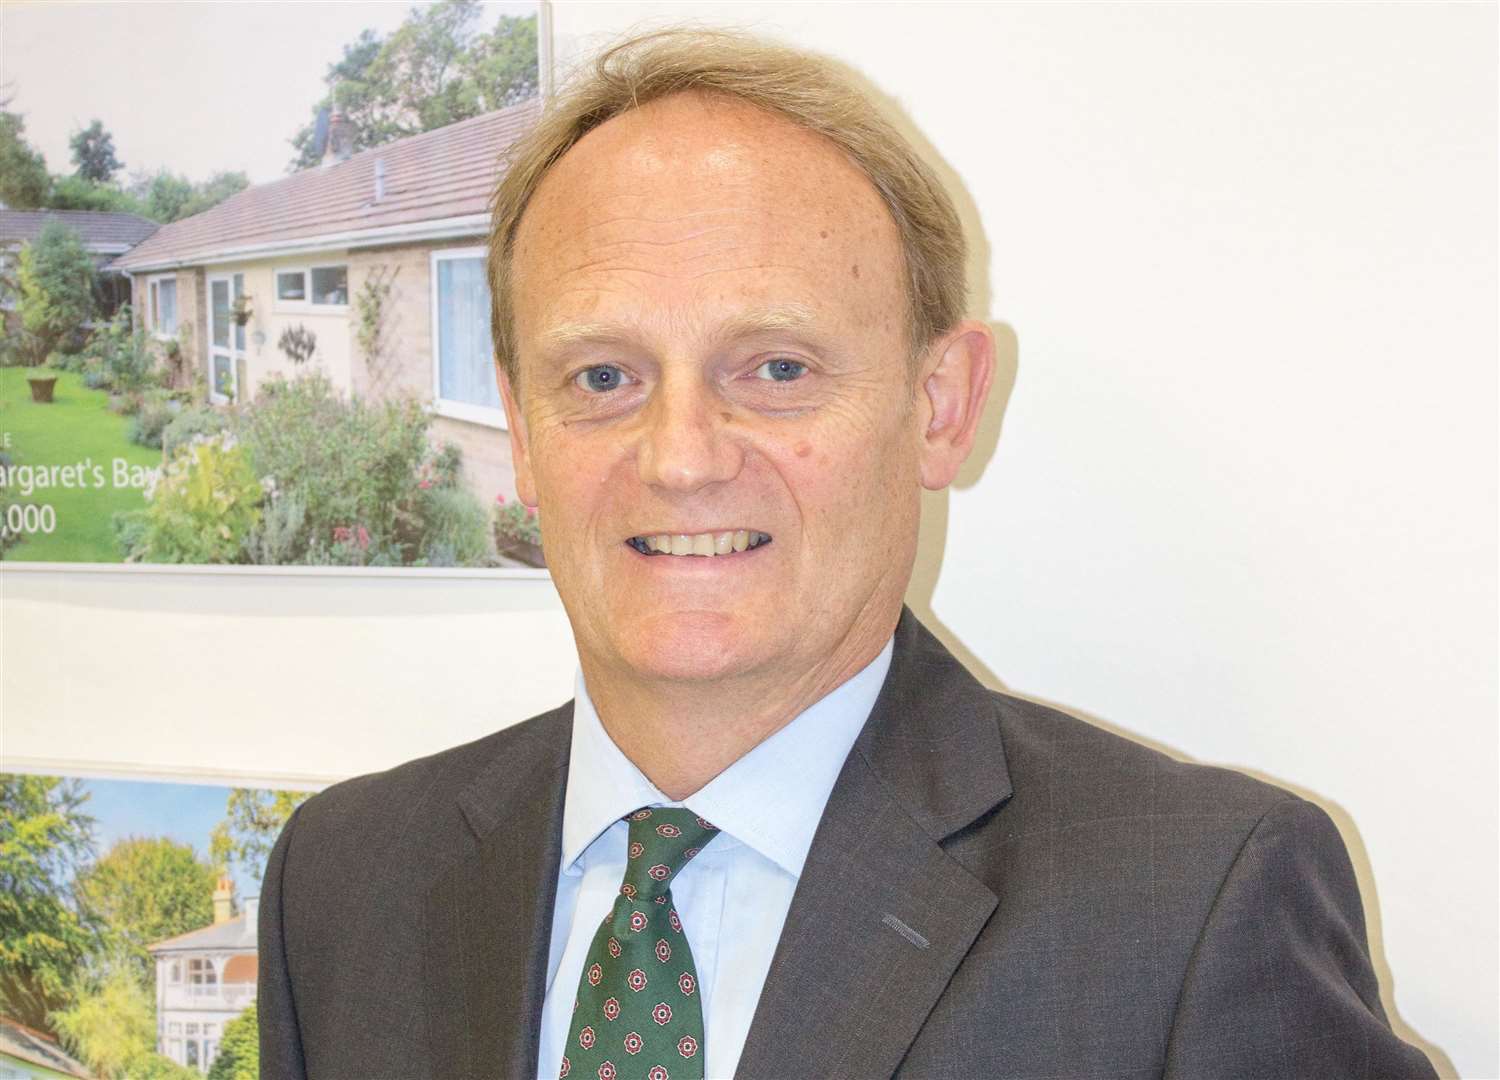 Simon Greaves is the managing director of Colebrook Sturrock